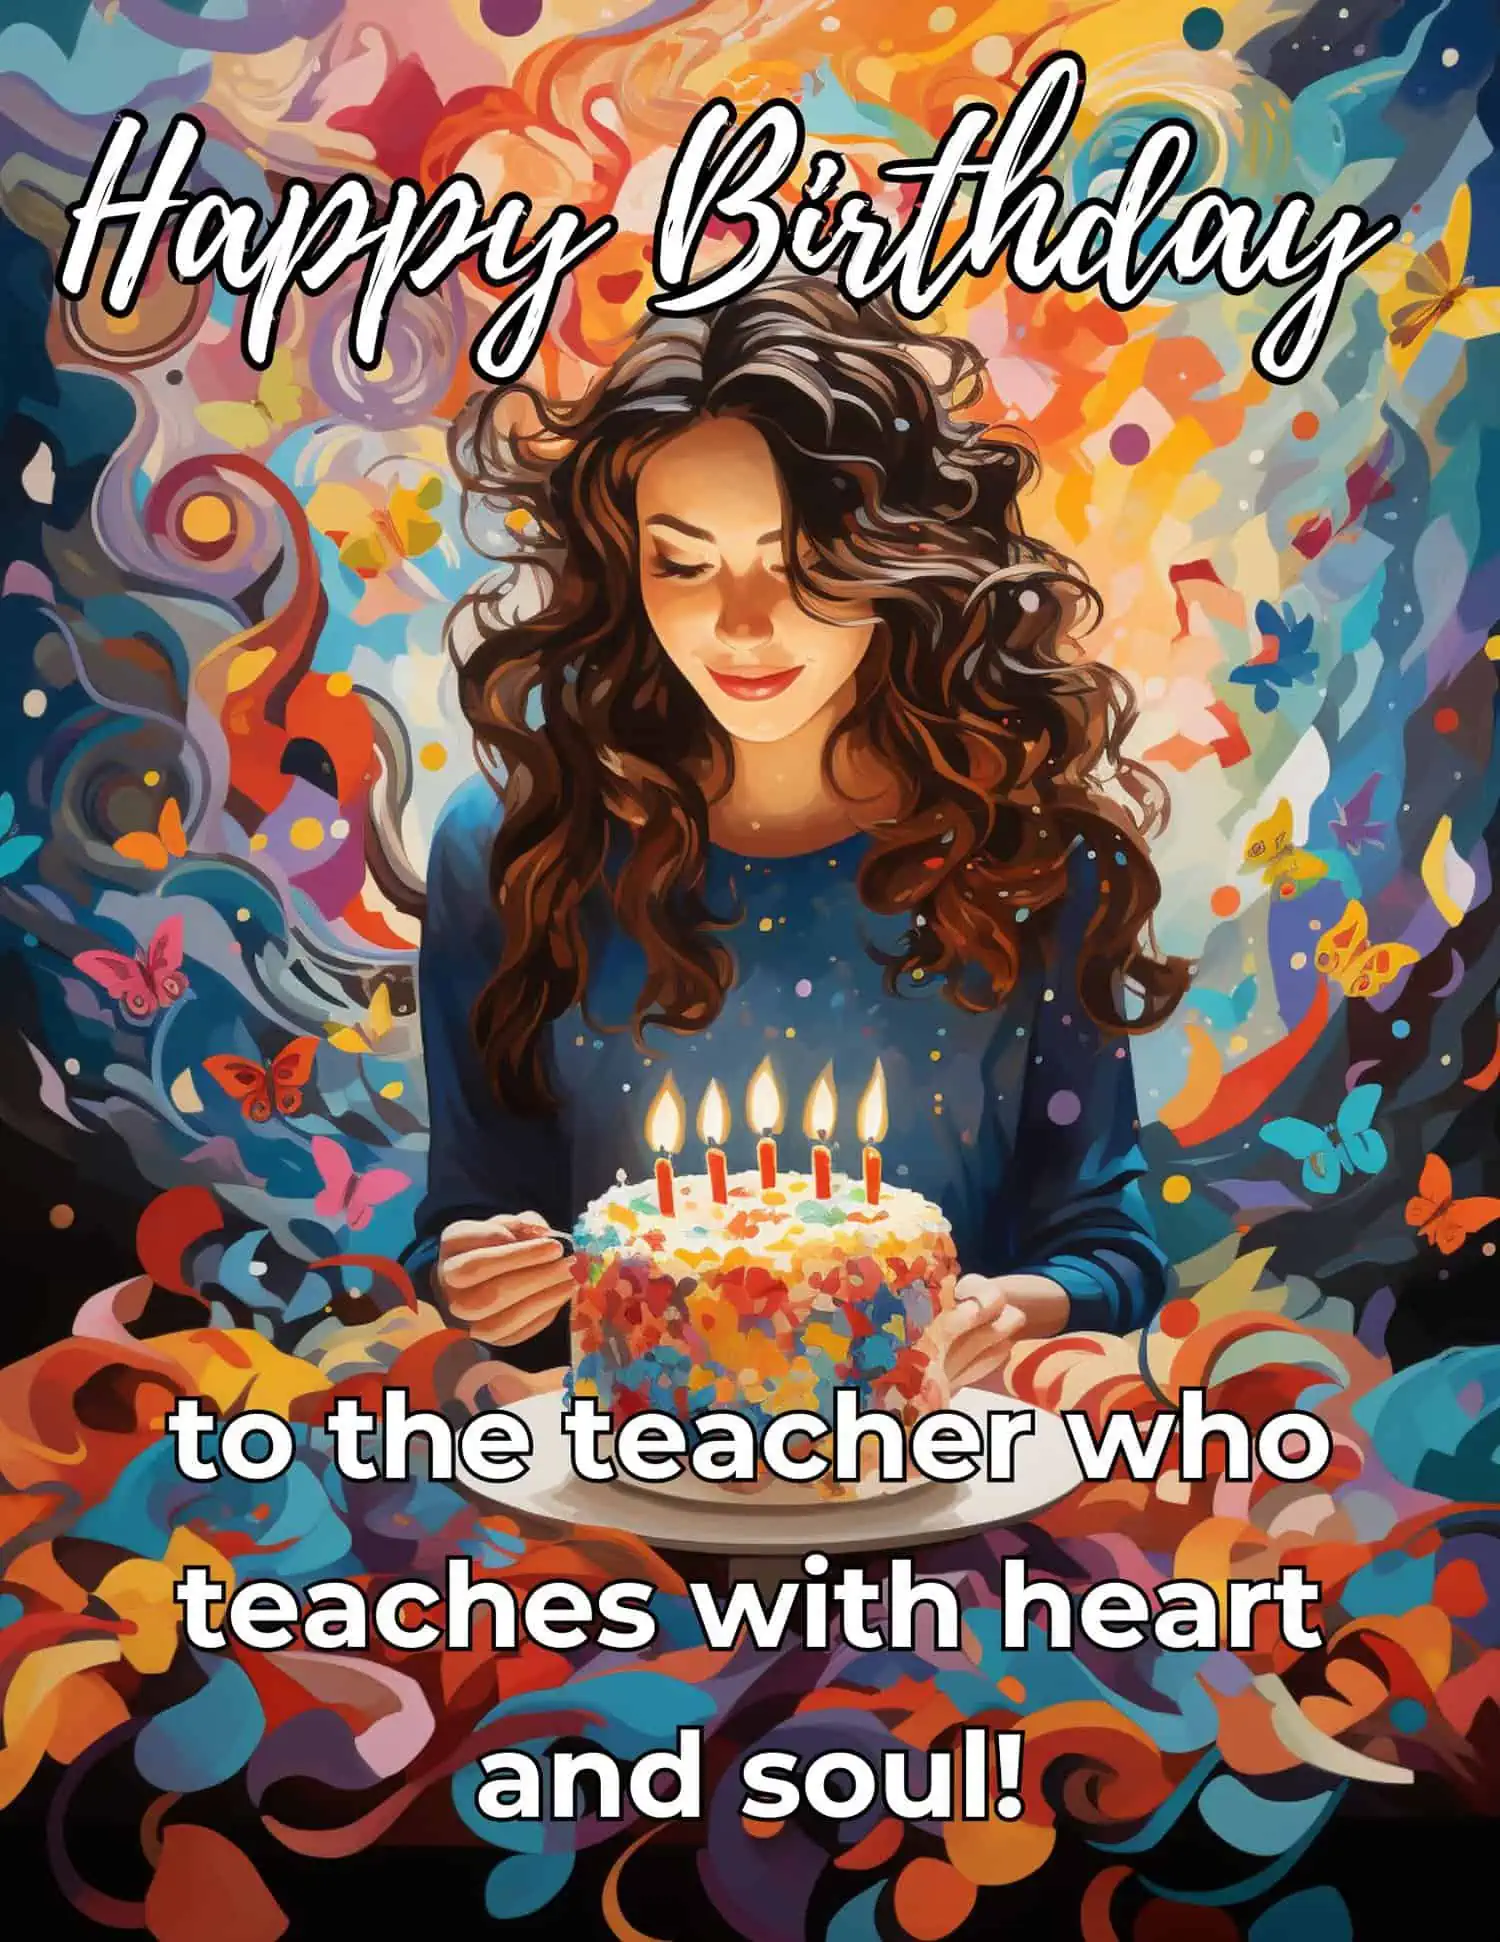 Warm and sincere birthday greetings tailored for female educators.